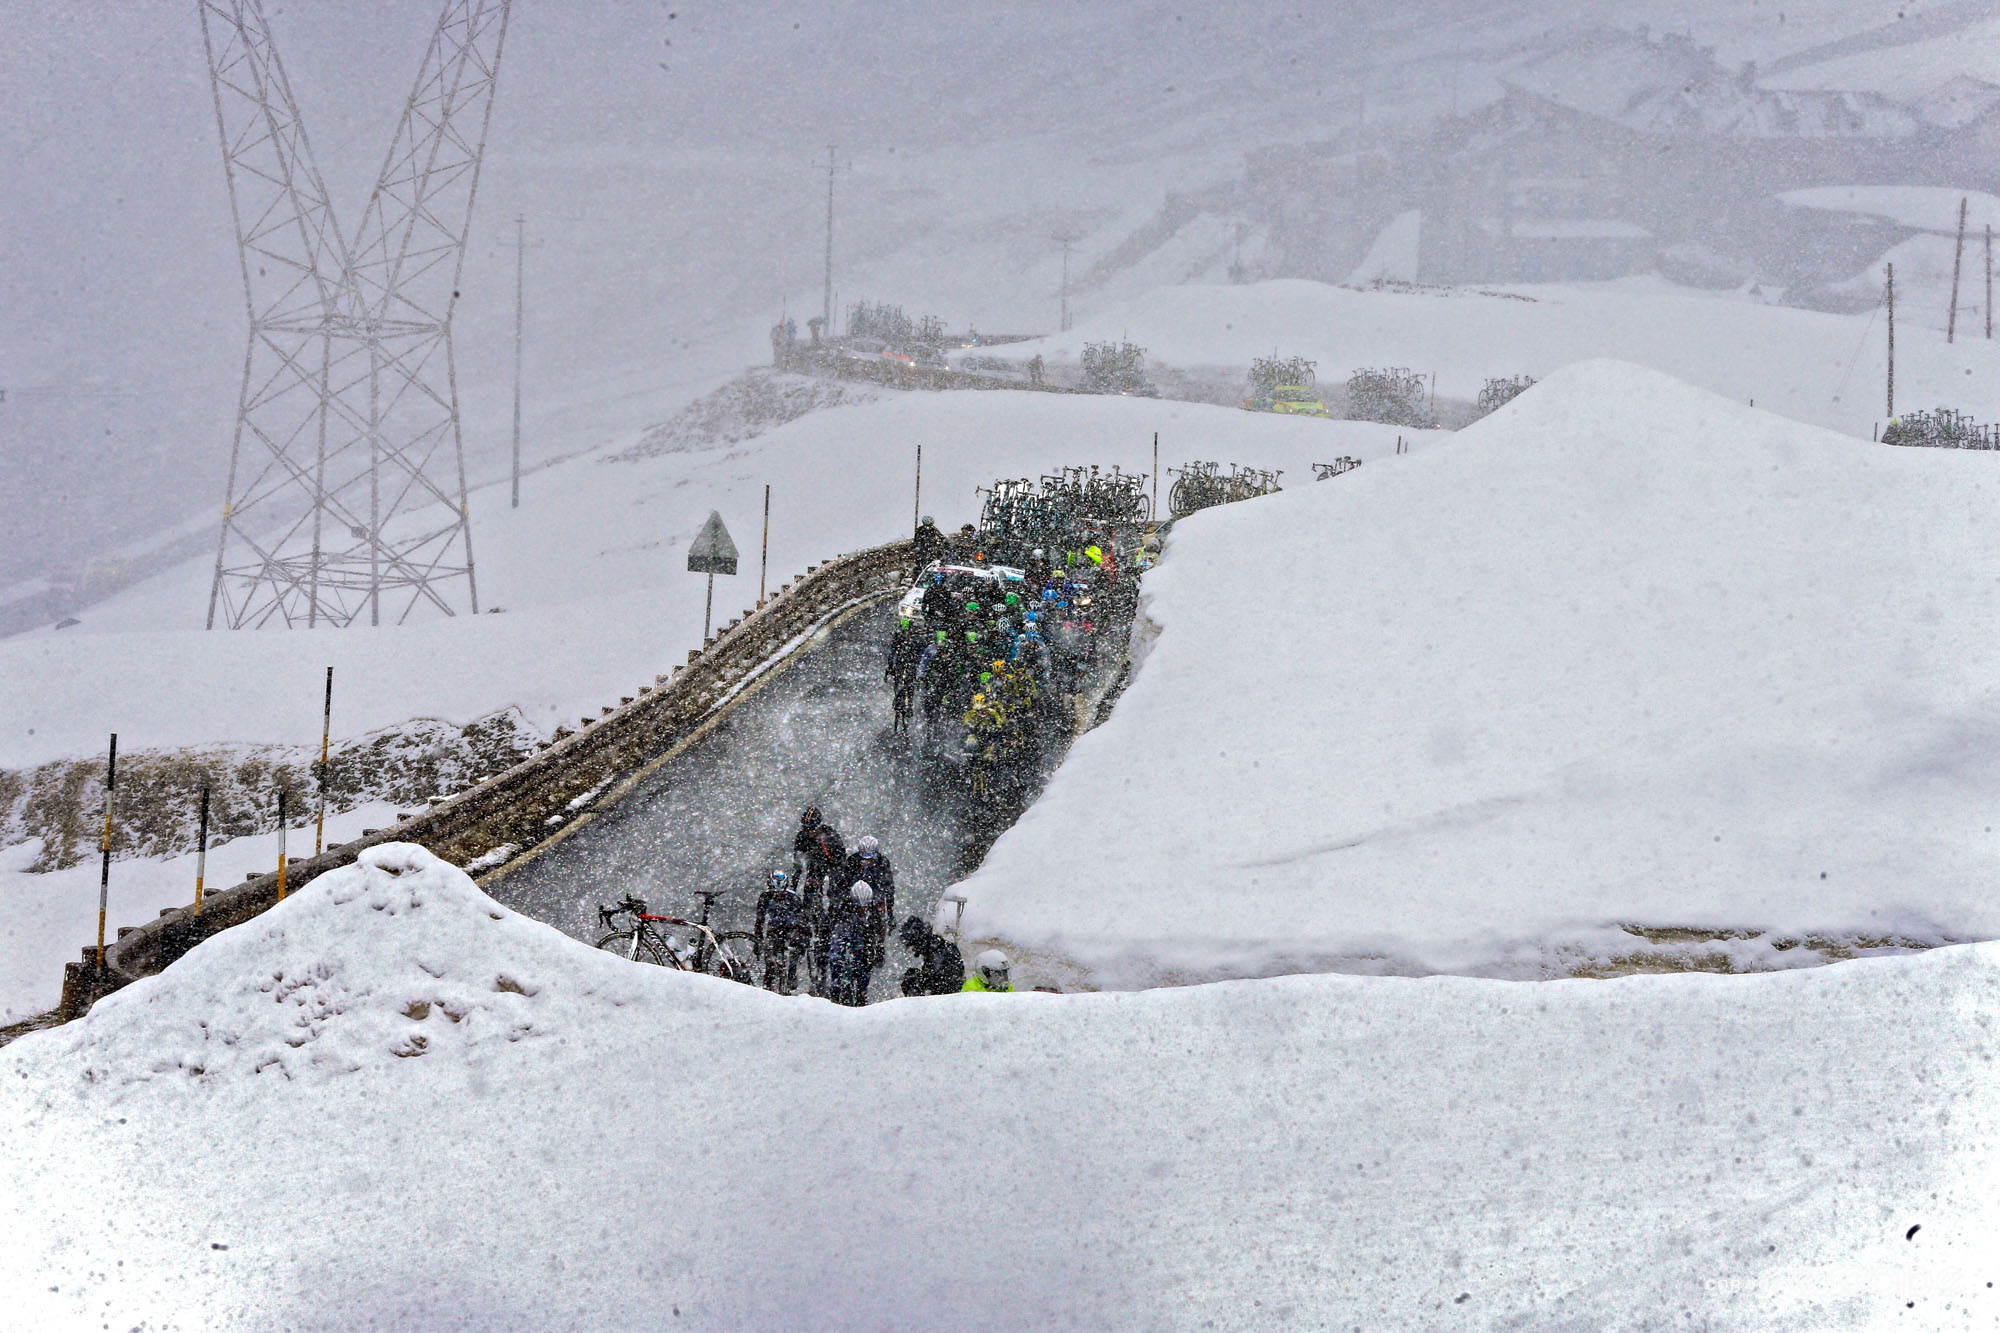 A snowy, rainy mountaintop scene with riders navigating woeful conditions in the high mountains.